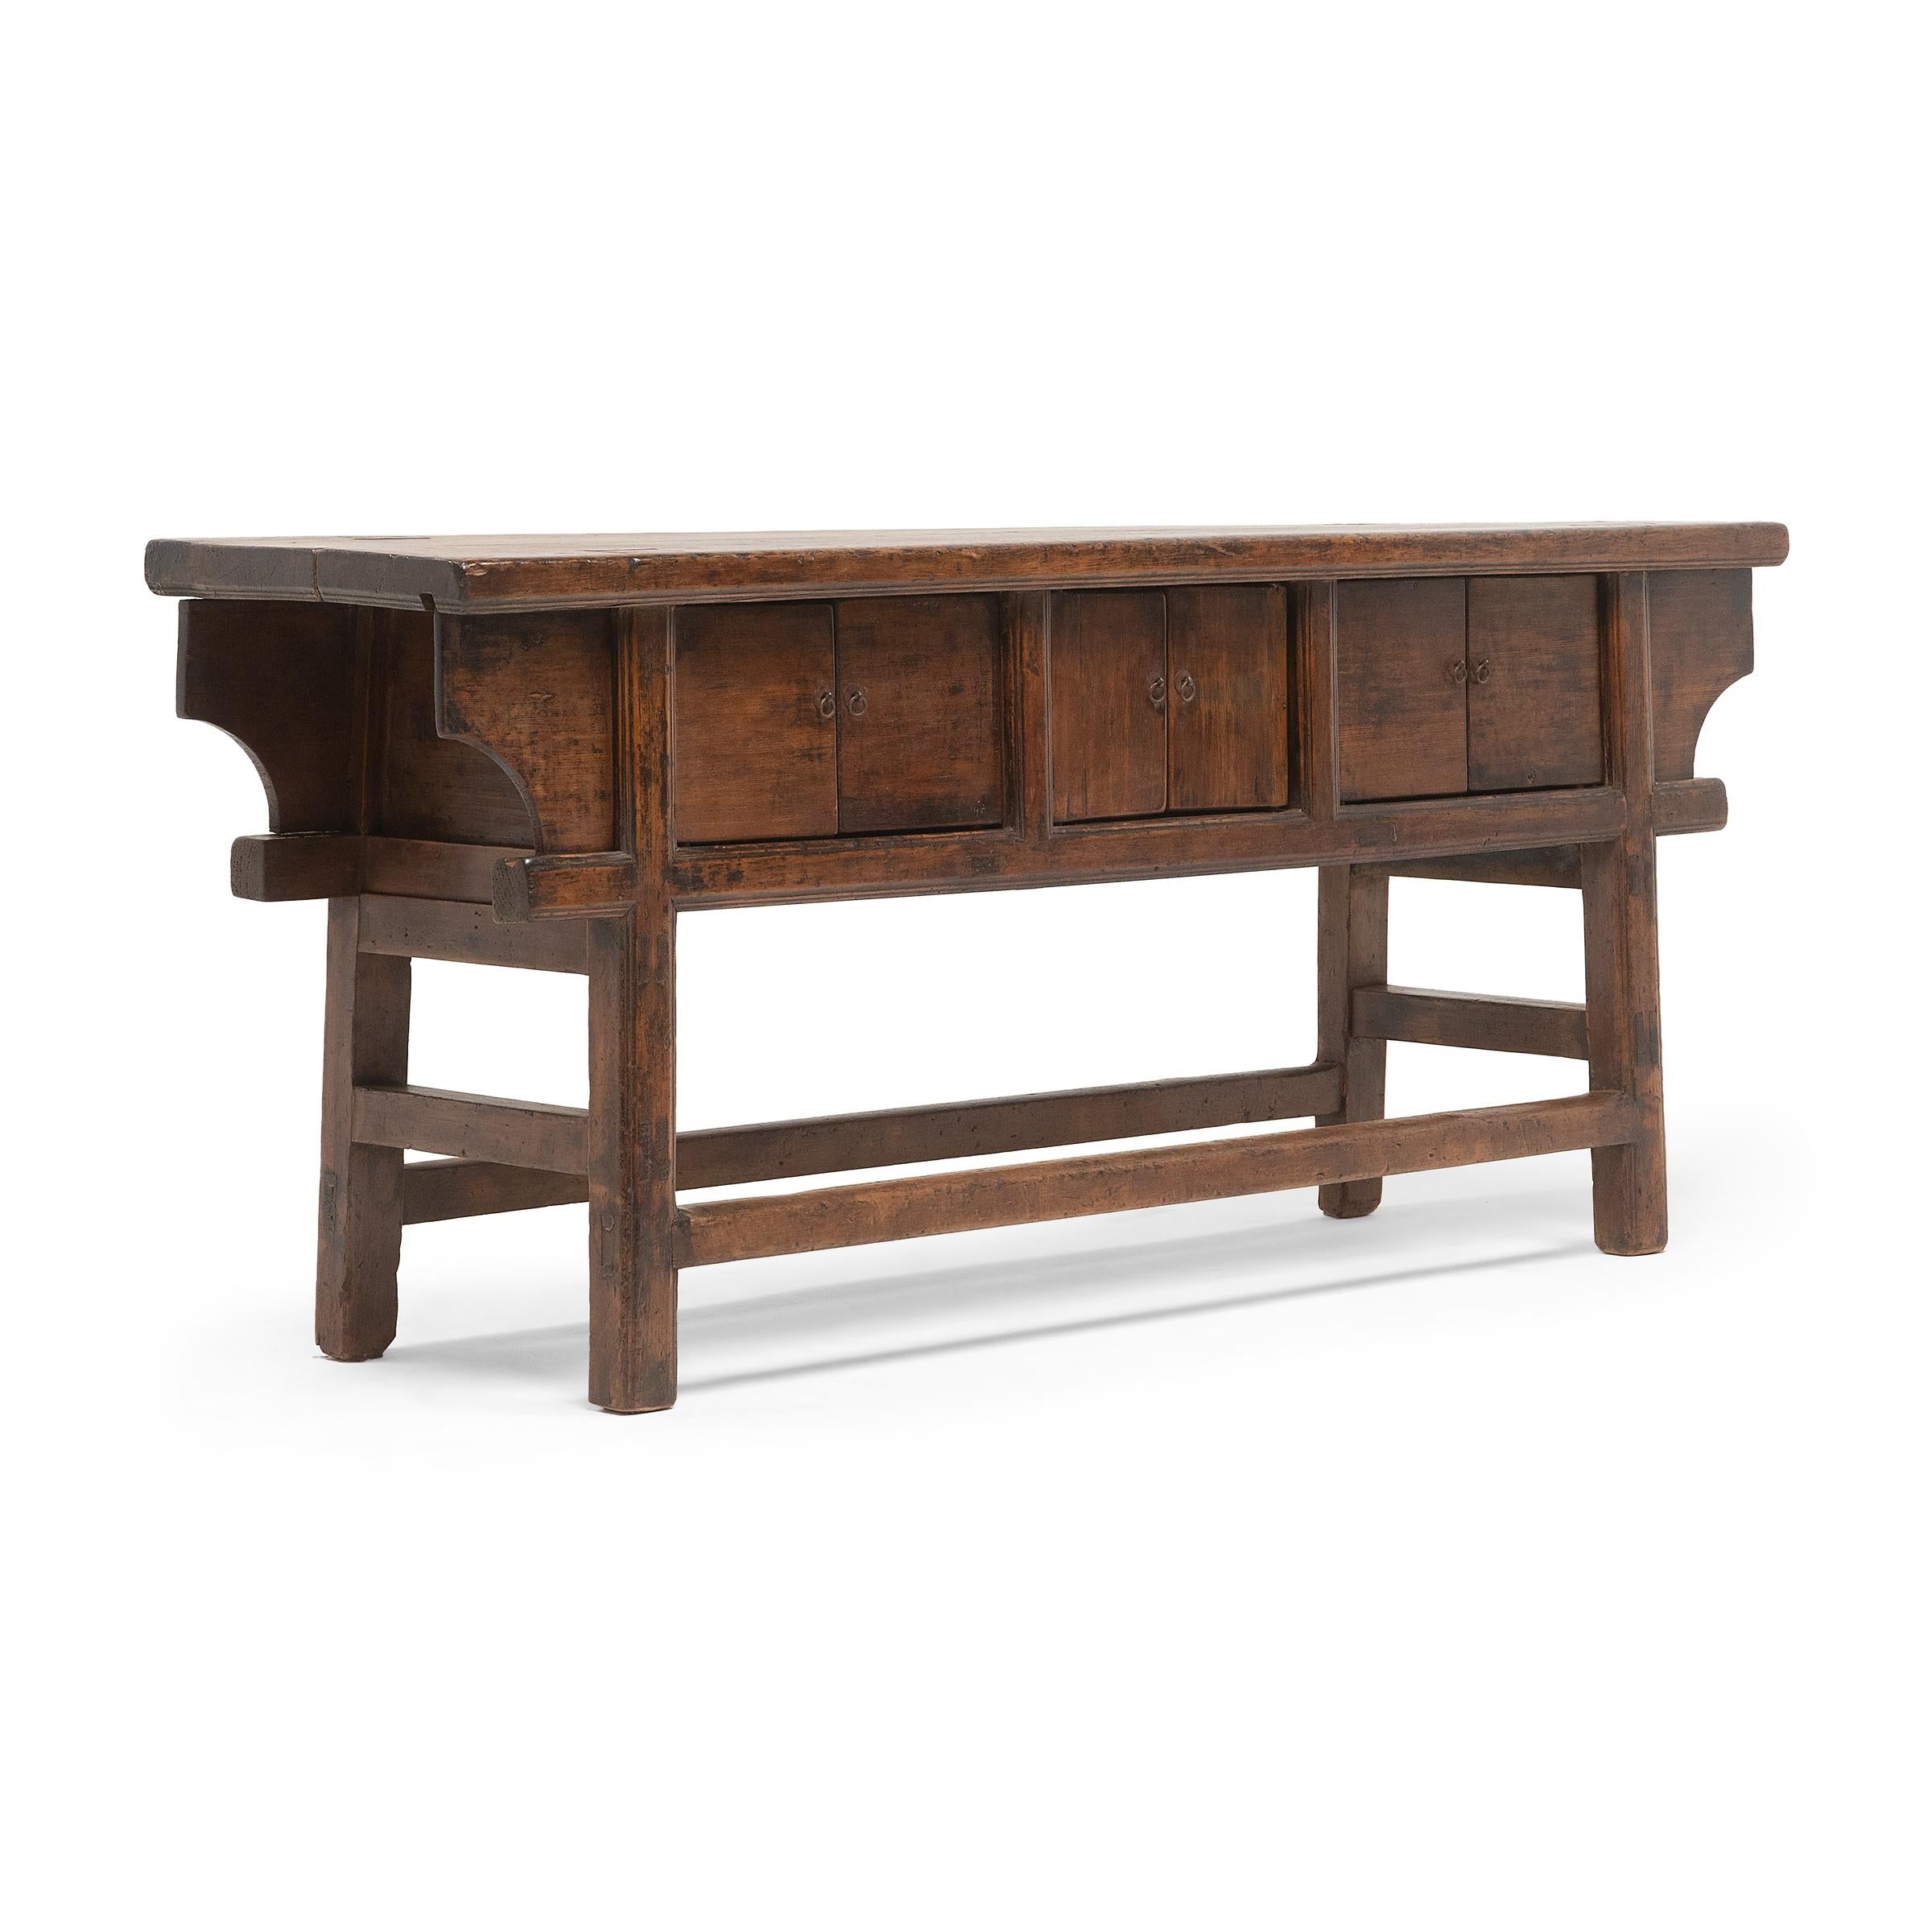 Qing Six-Door Chinese Dongbei Sideboard, c. 1900 For Sale